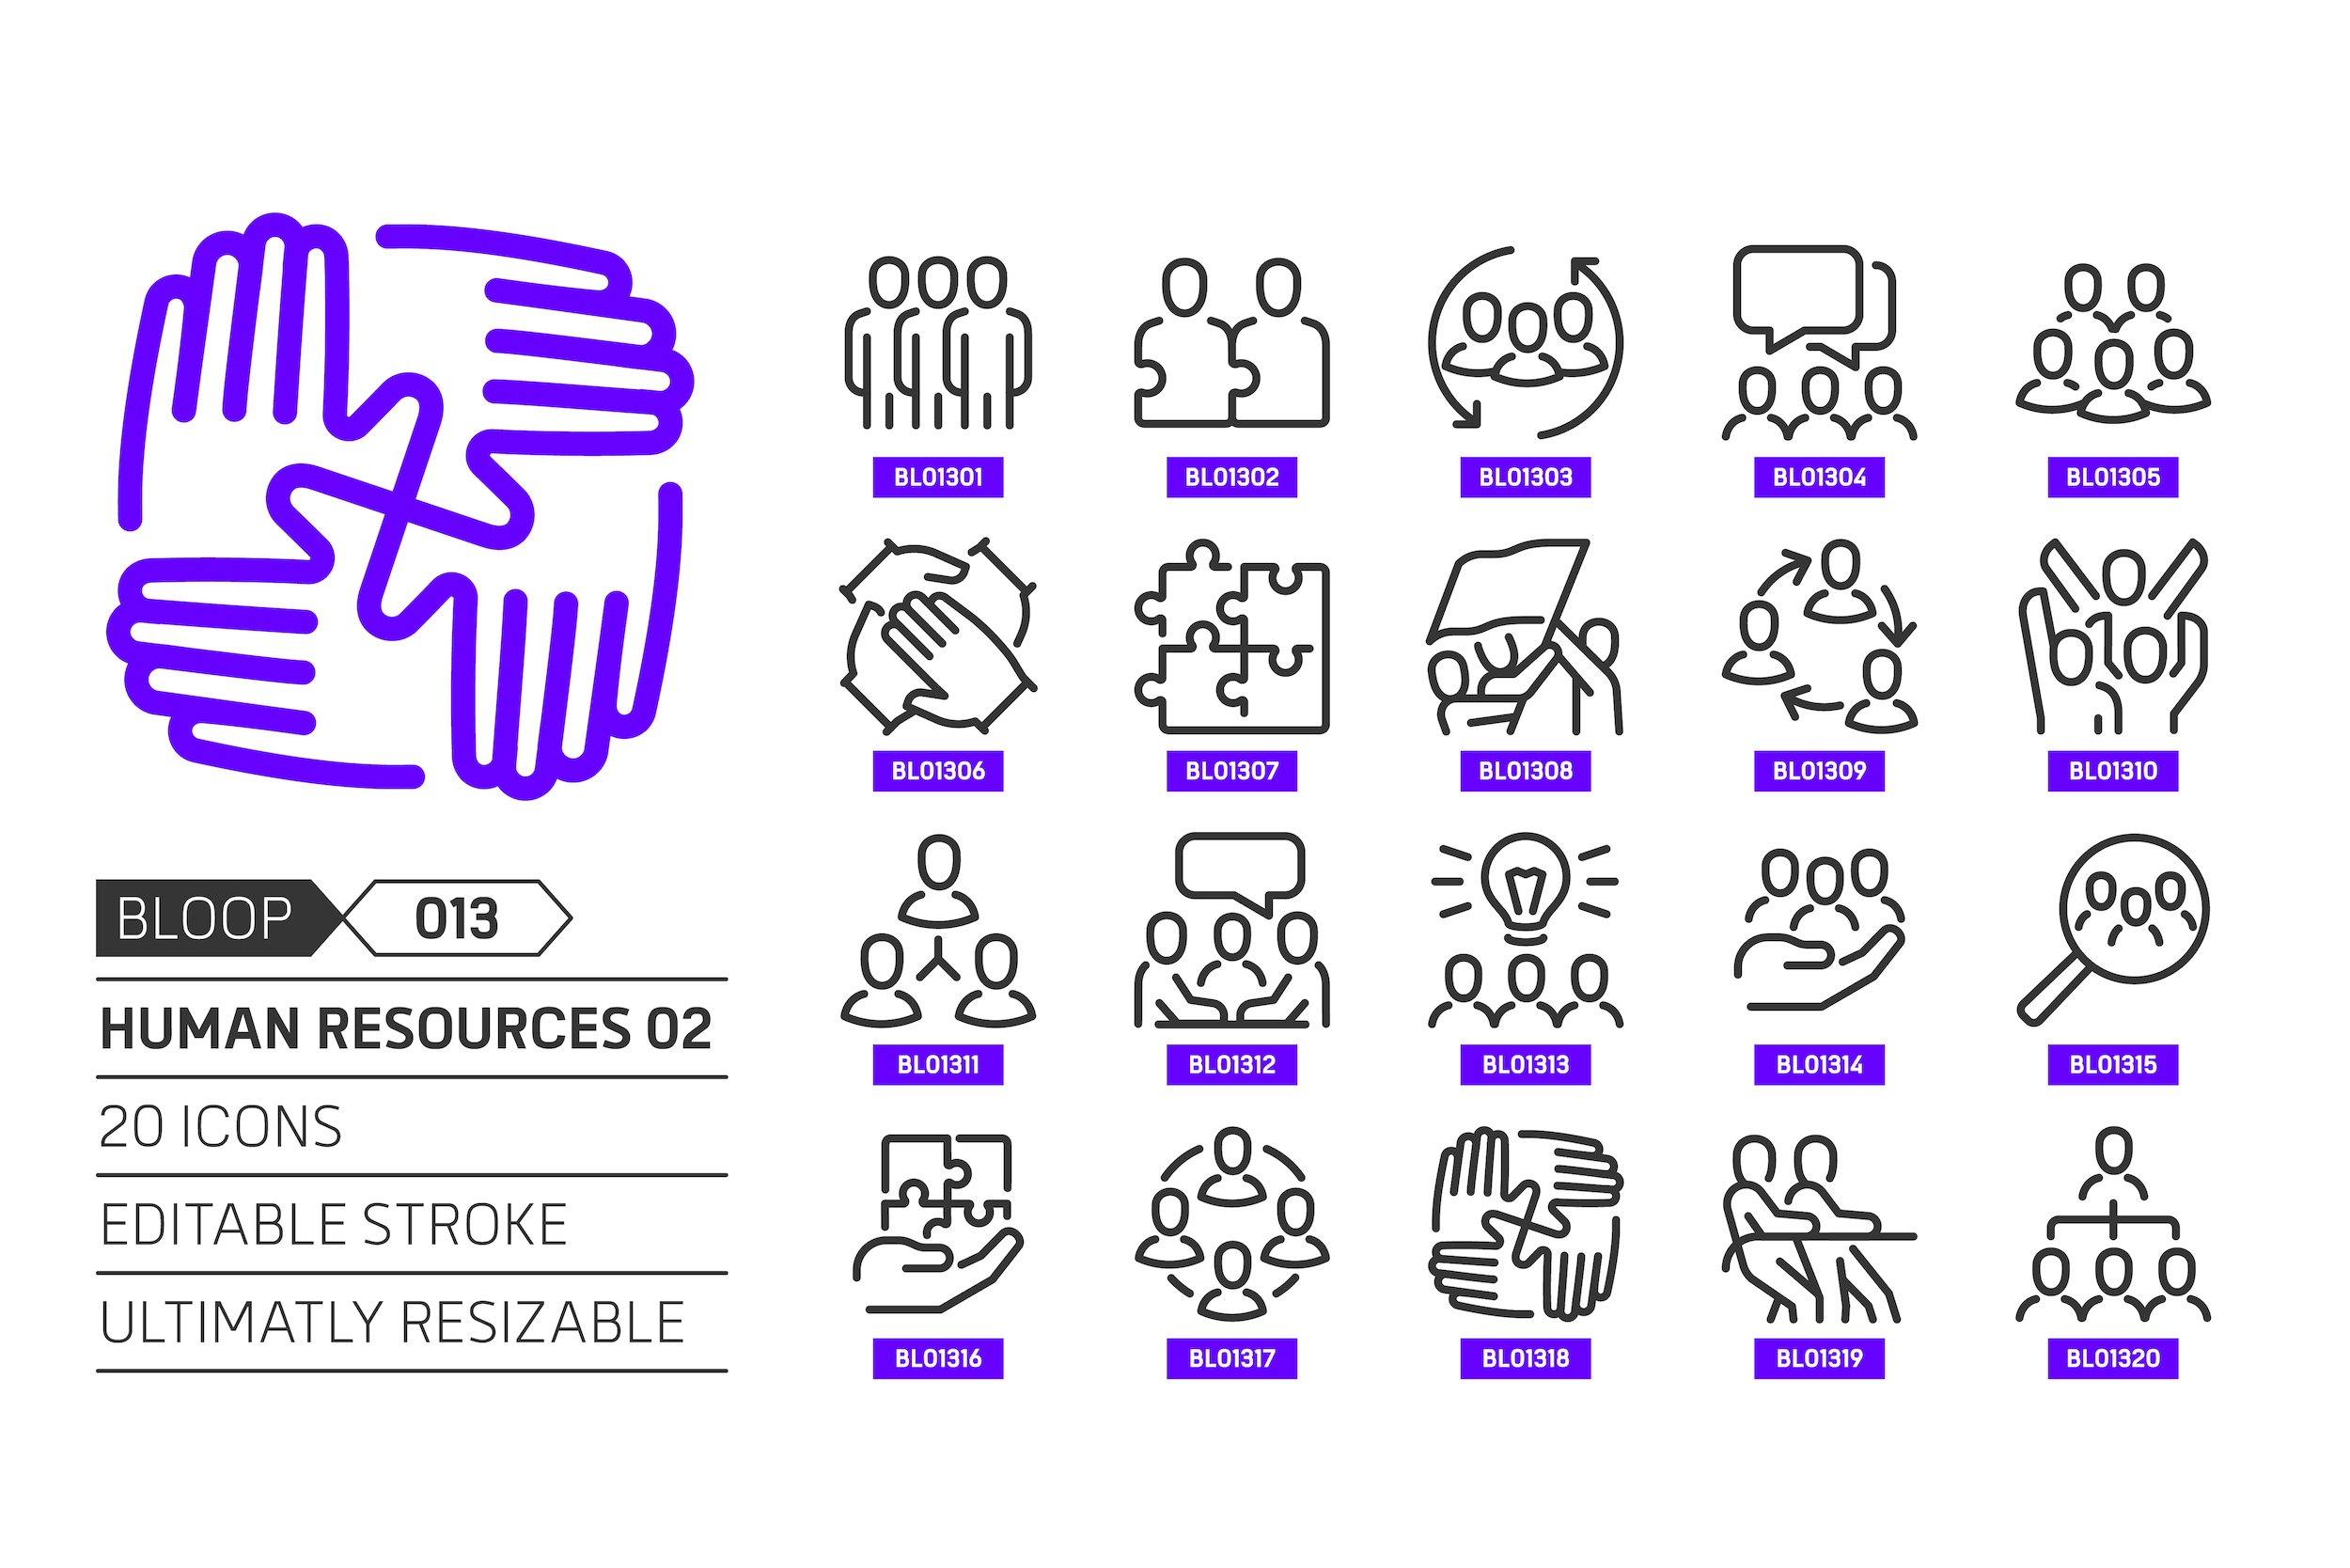 Human resources 02, bloop icons cover image.